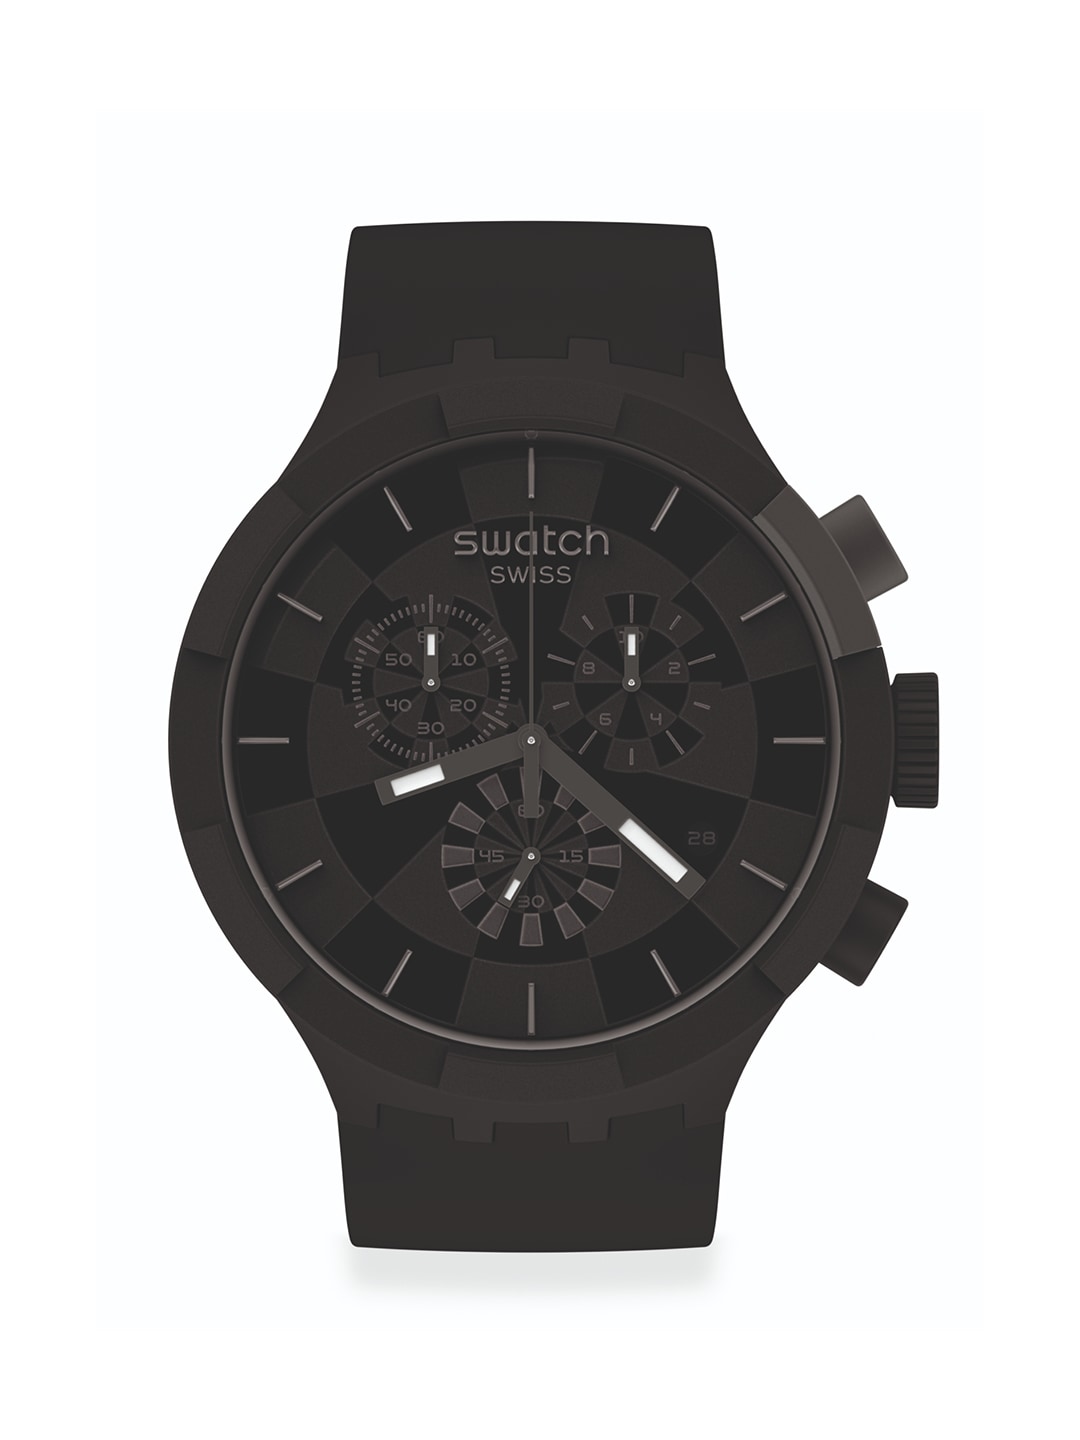 Swatch Unisex Black Water Resistant Analogue Watch SB02B400 Price in India